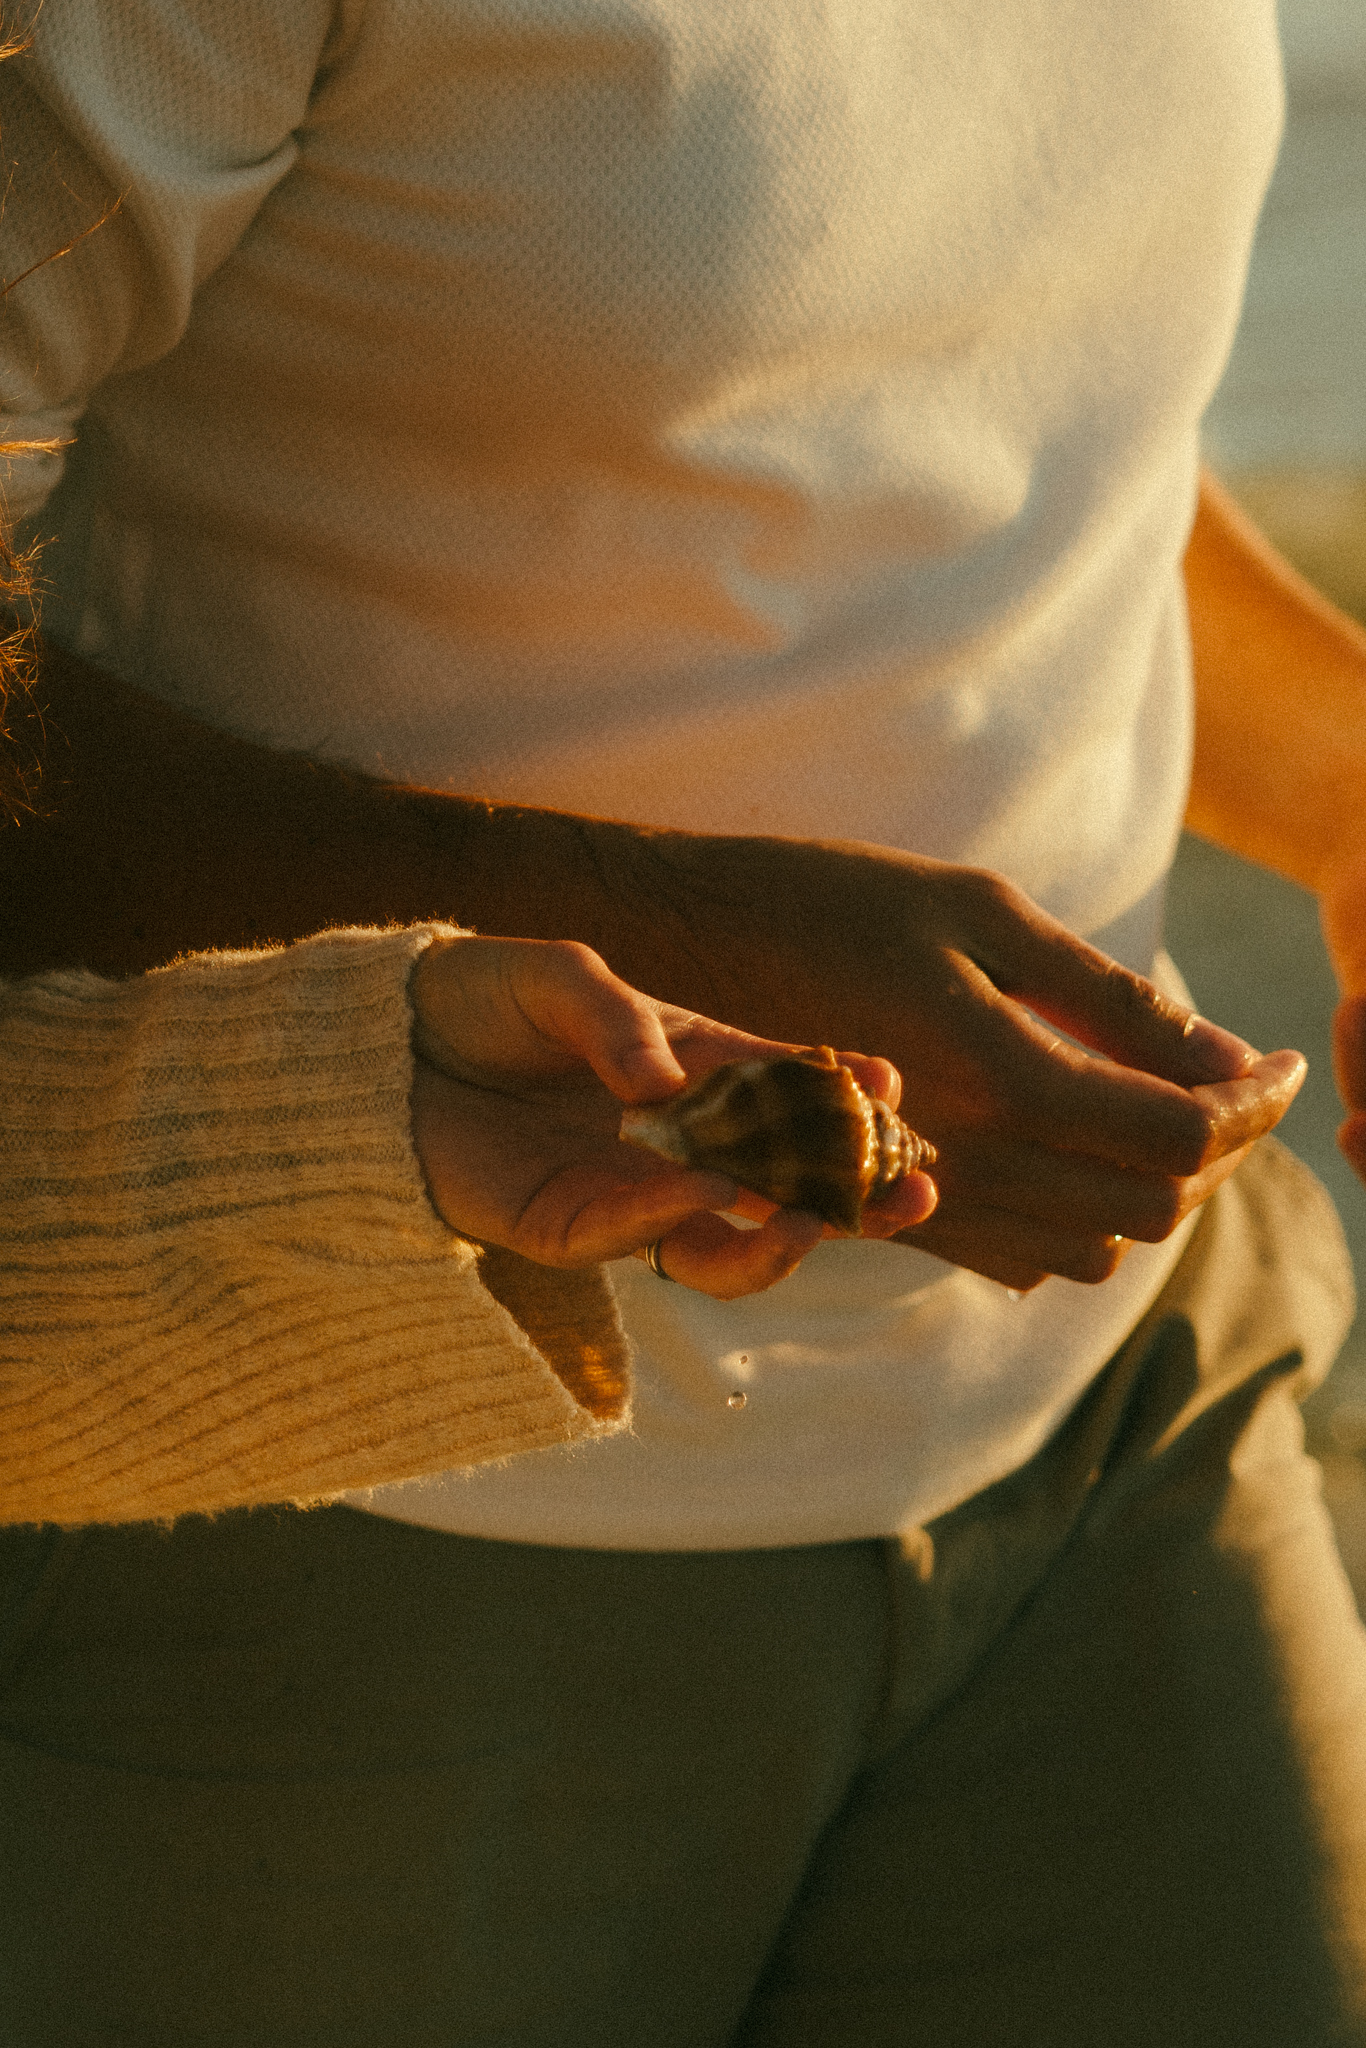 Documentary style photo of hand holding dripping seashell.